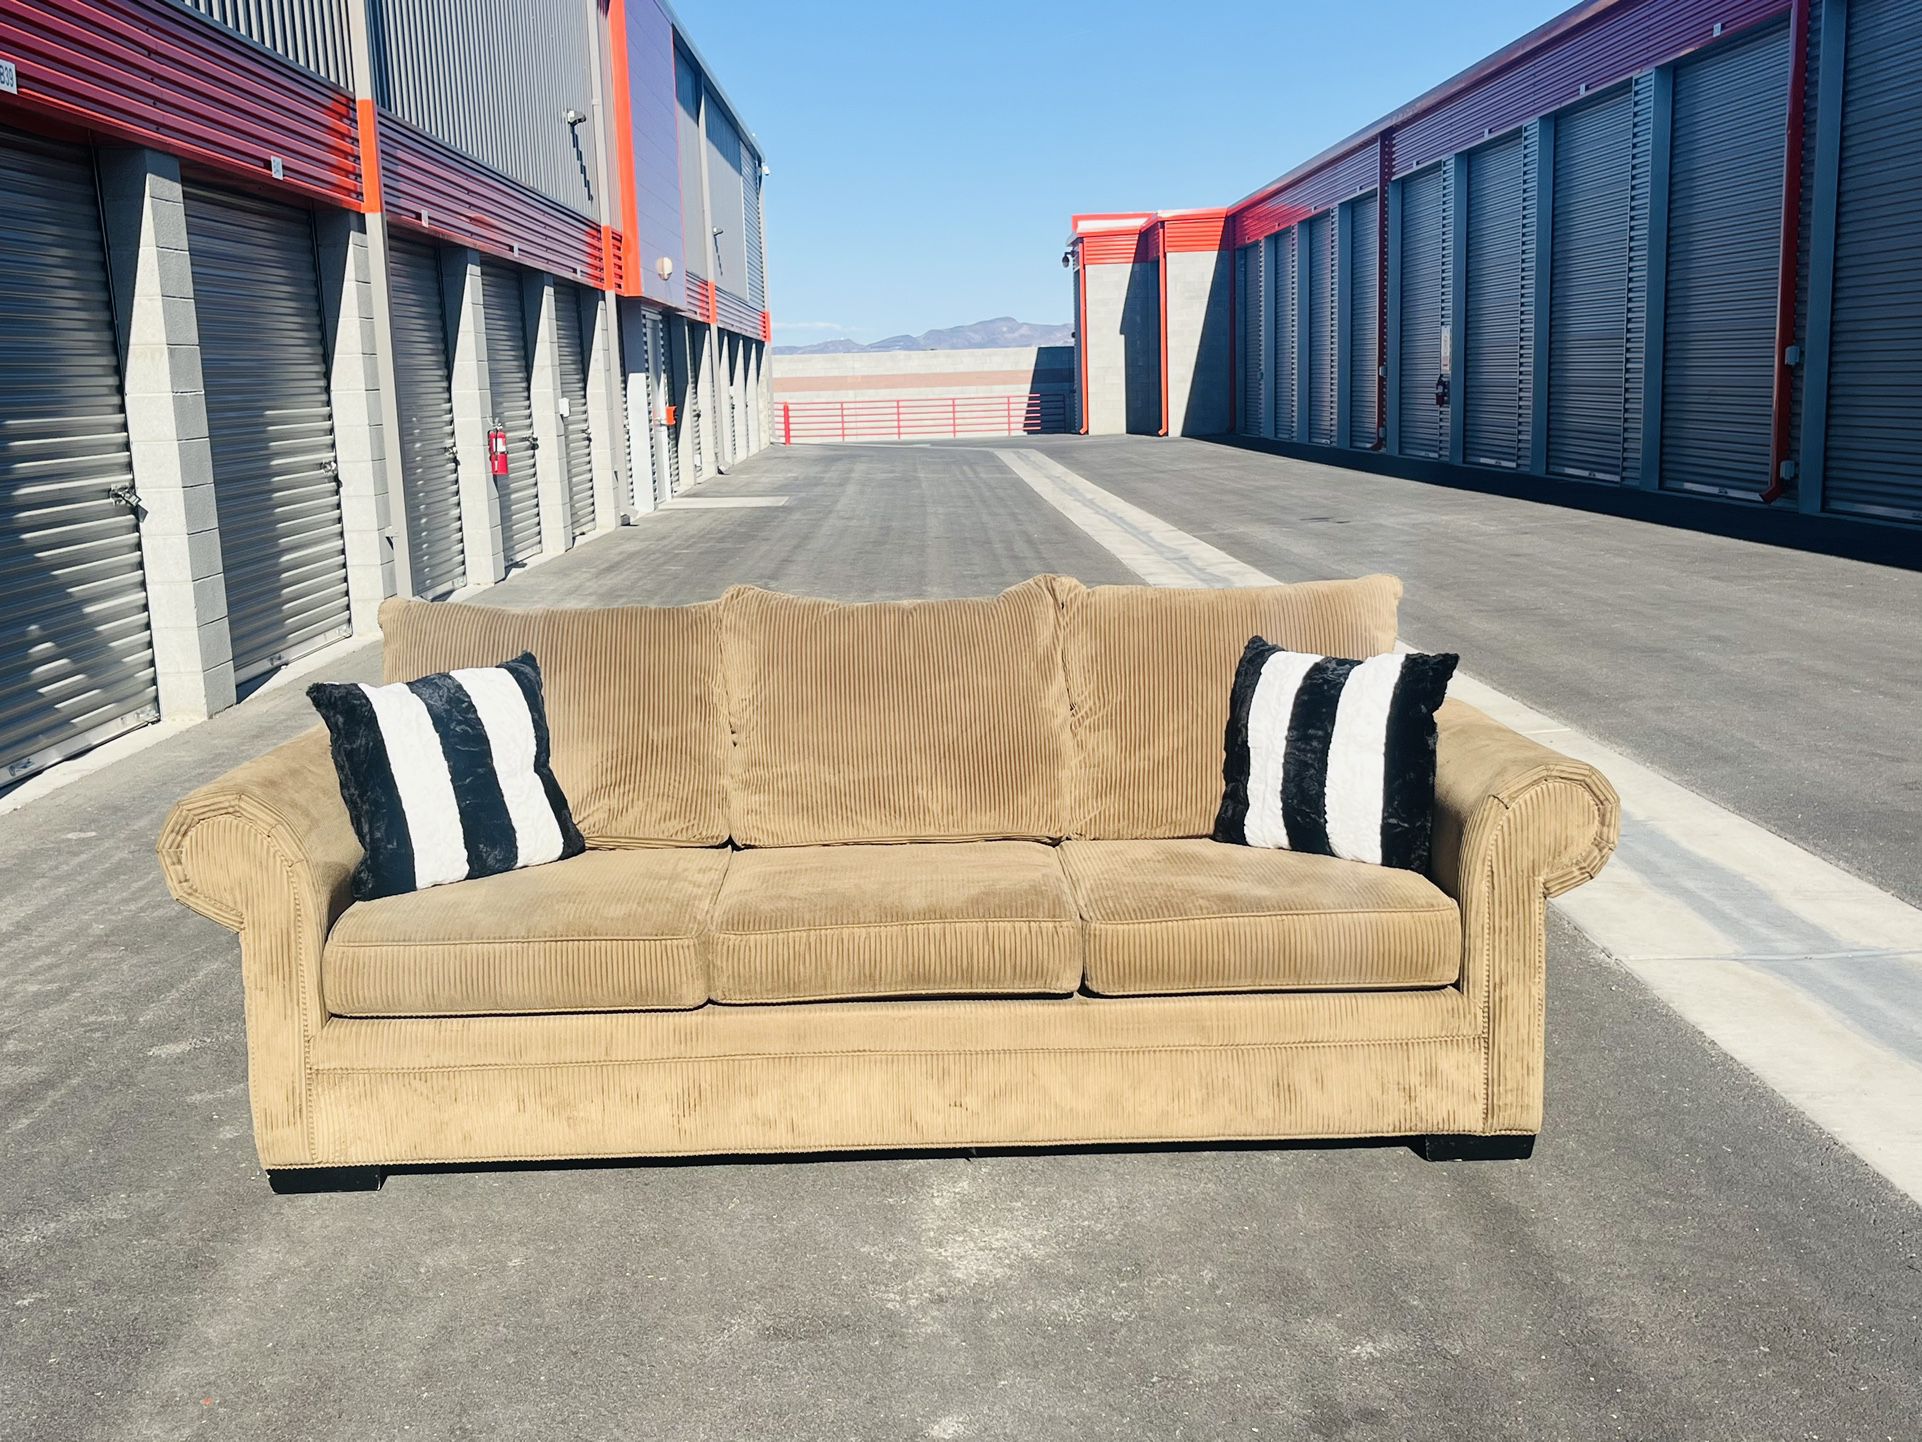 🤩AWESOME DEAL😍BEAUTIFUL LIKE NEW “CORDUROY JOY” LARGE SOFA⭐️FREE DELIVERY 🚚 